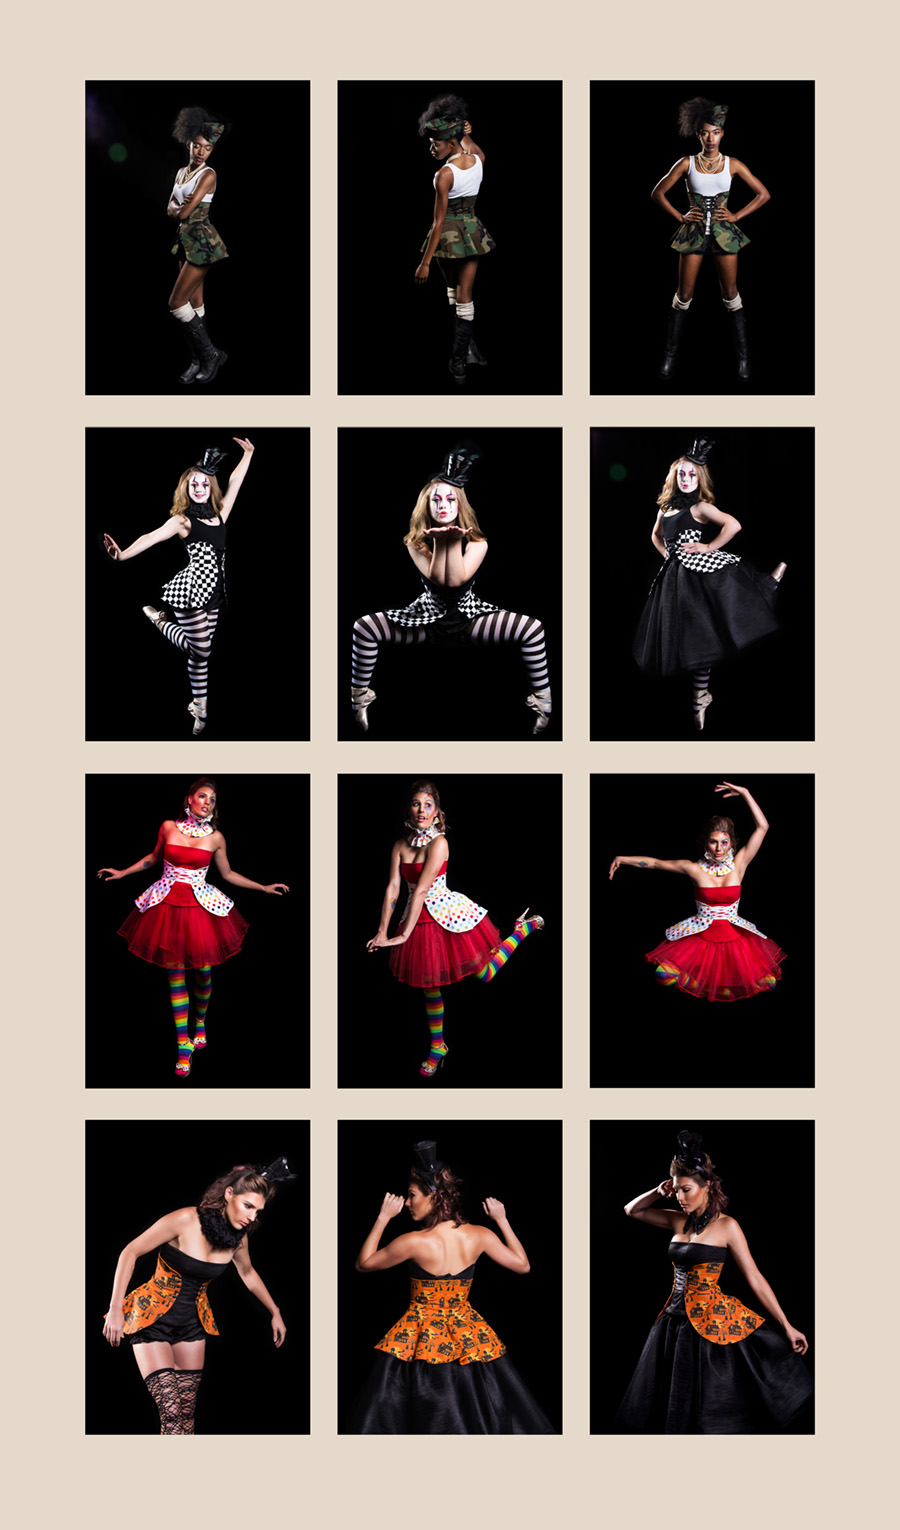 Collage of photos by Britt Smith Photography of Halloween Costumes custom made by Trapped in Time Designs in New Orleans Louisiana. Clothing modeled by Ashara Grimes, ballerina, Olivia Ernst and Amber Carollo